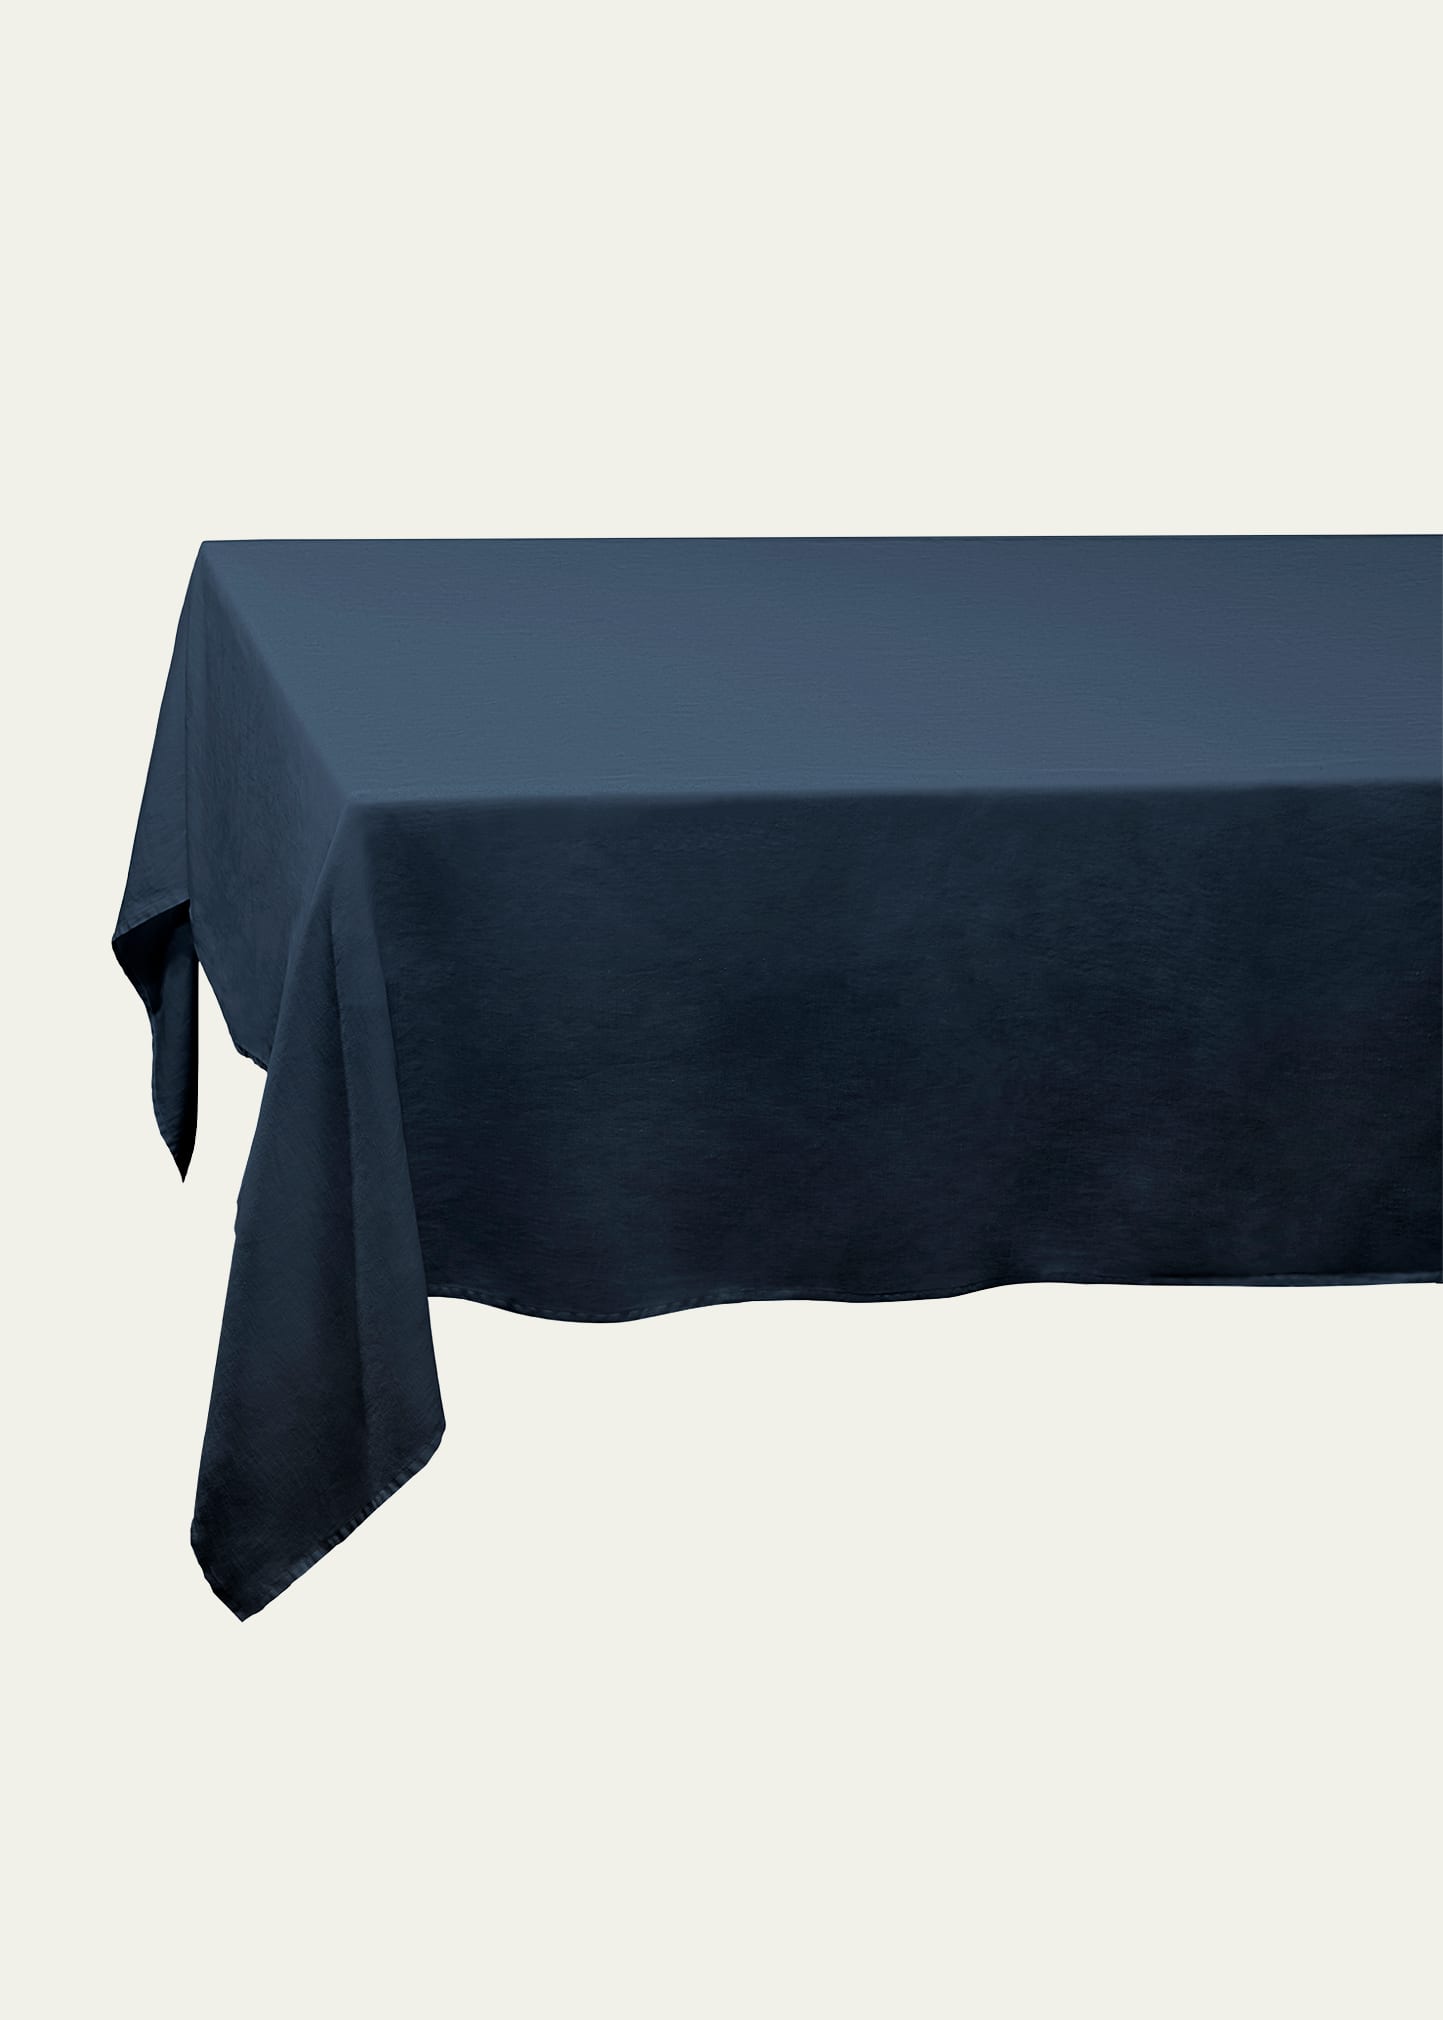 L'Objet Concorde Sateen Tablecloth, Large